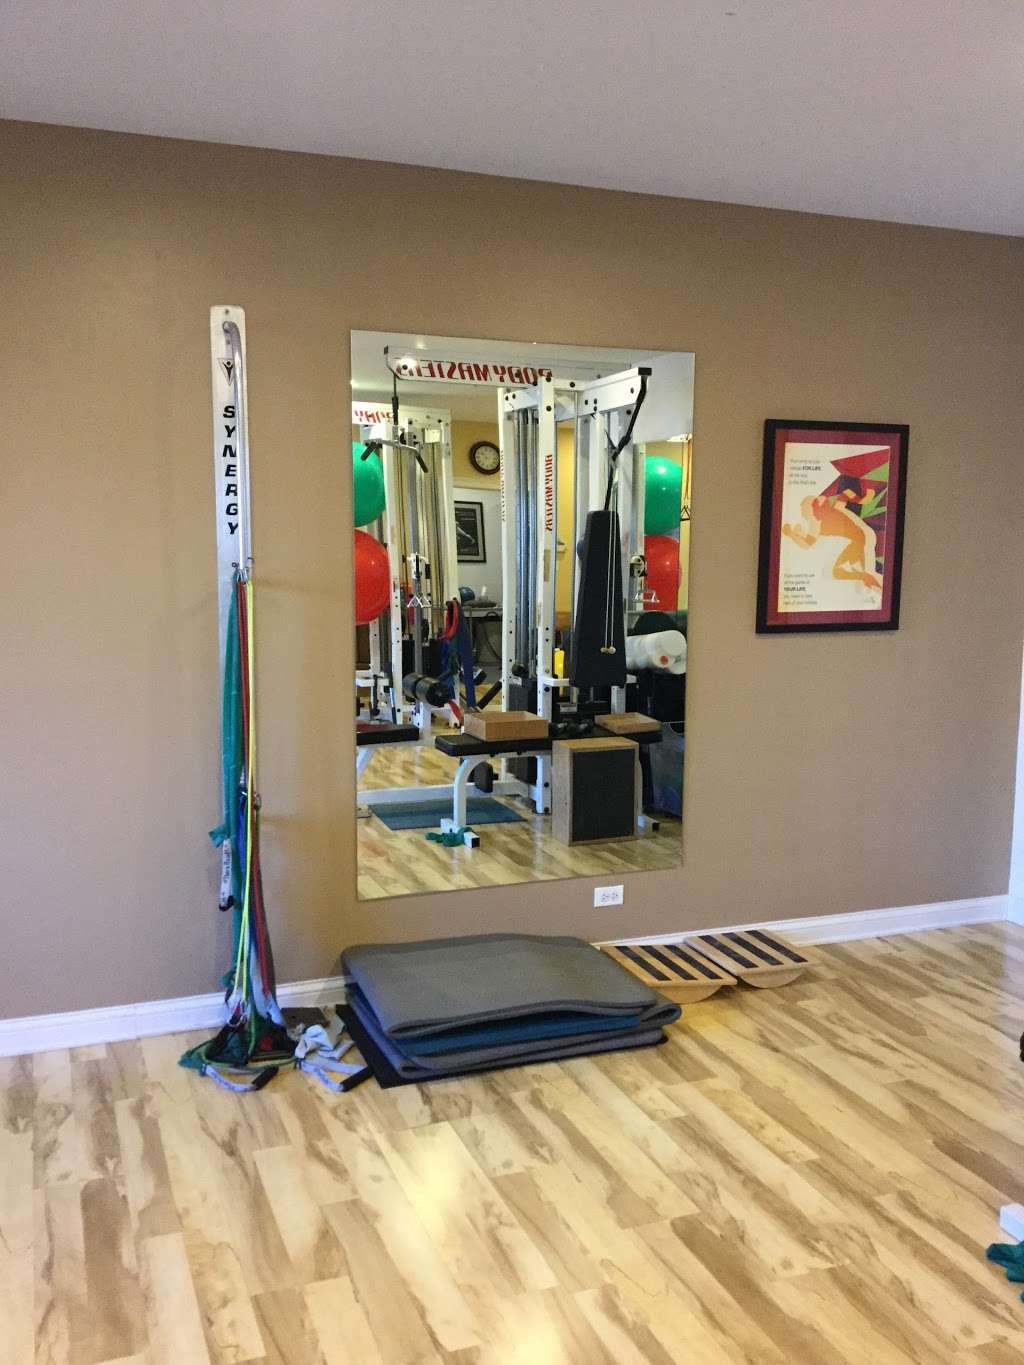 Artaius Physical Therapy & Rehab | 736 Florsheim Dr #13, Libertyville, IL 60048 | Phone: (847) 680-1278